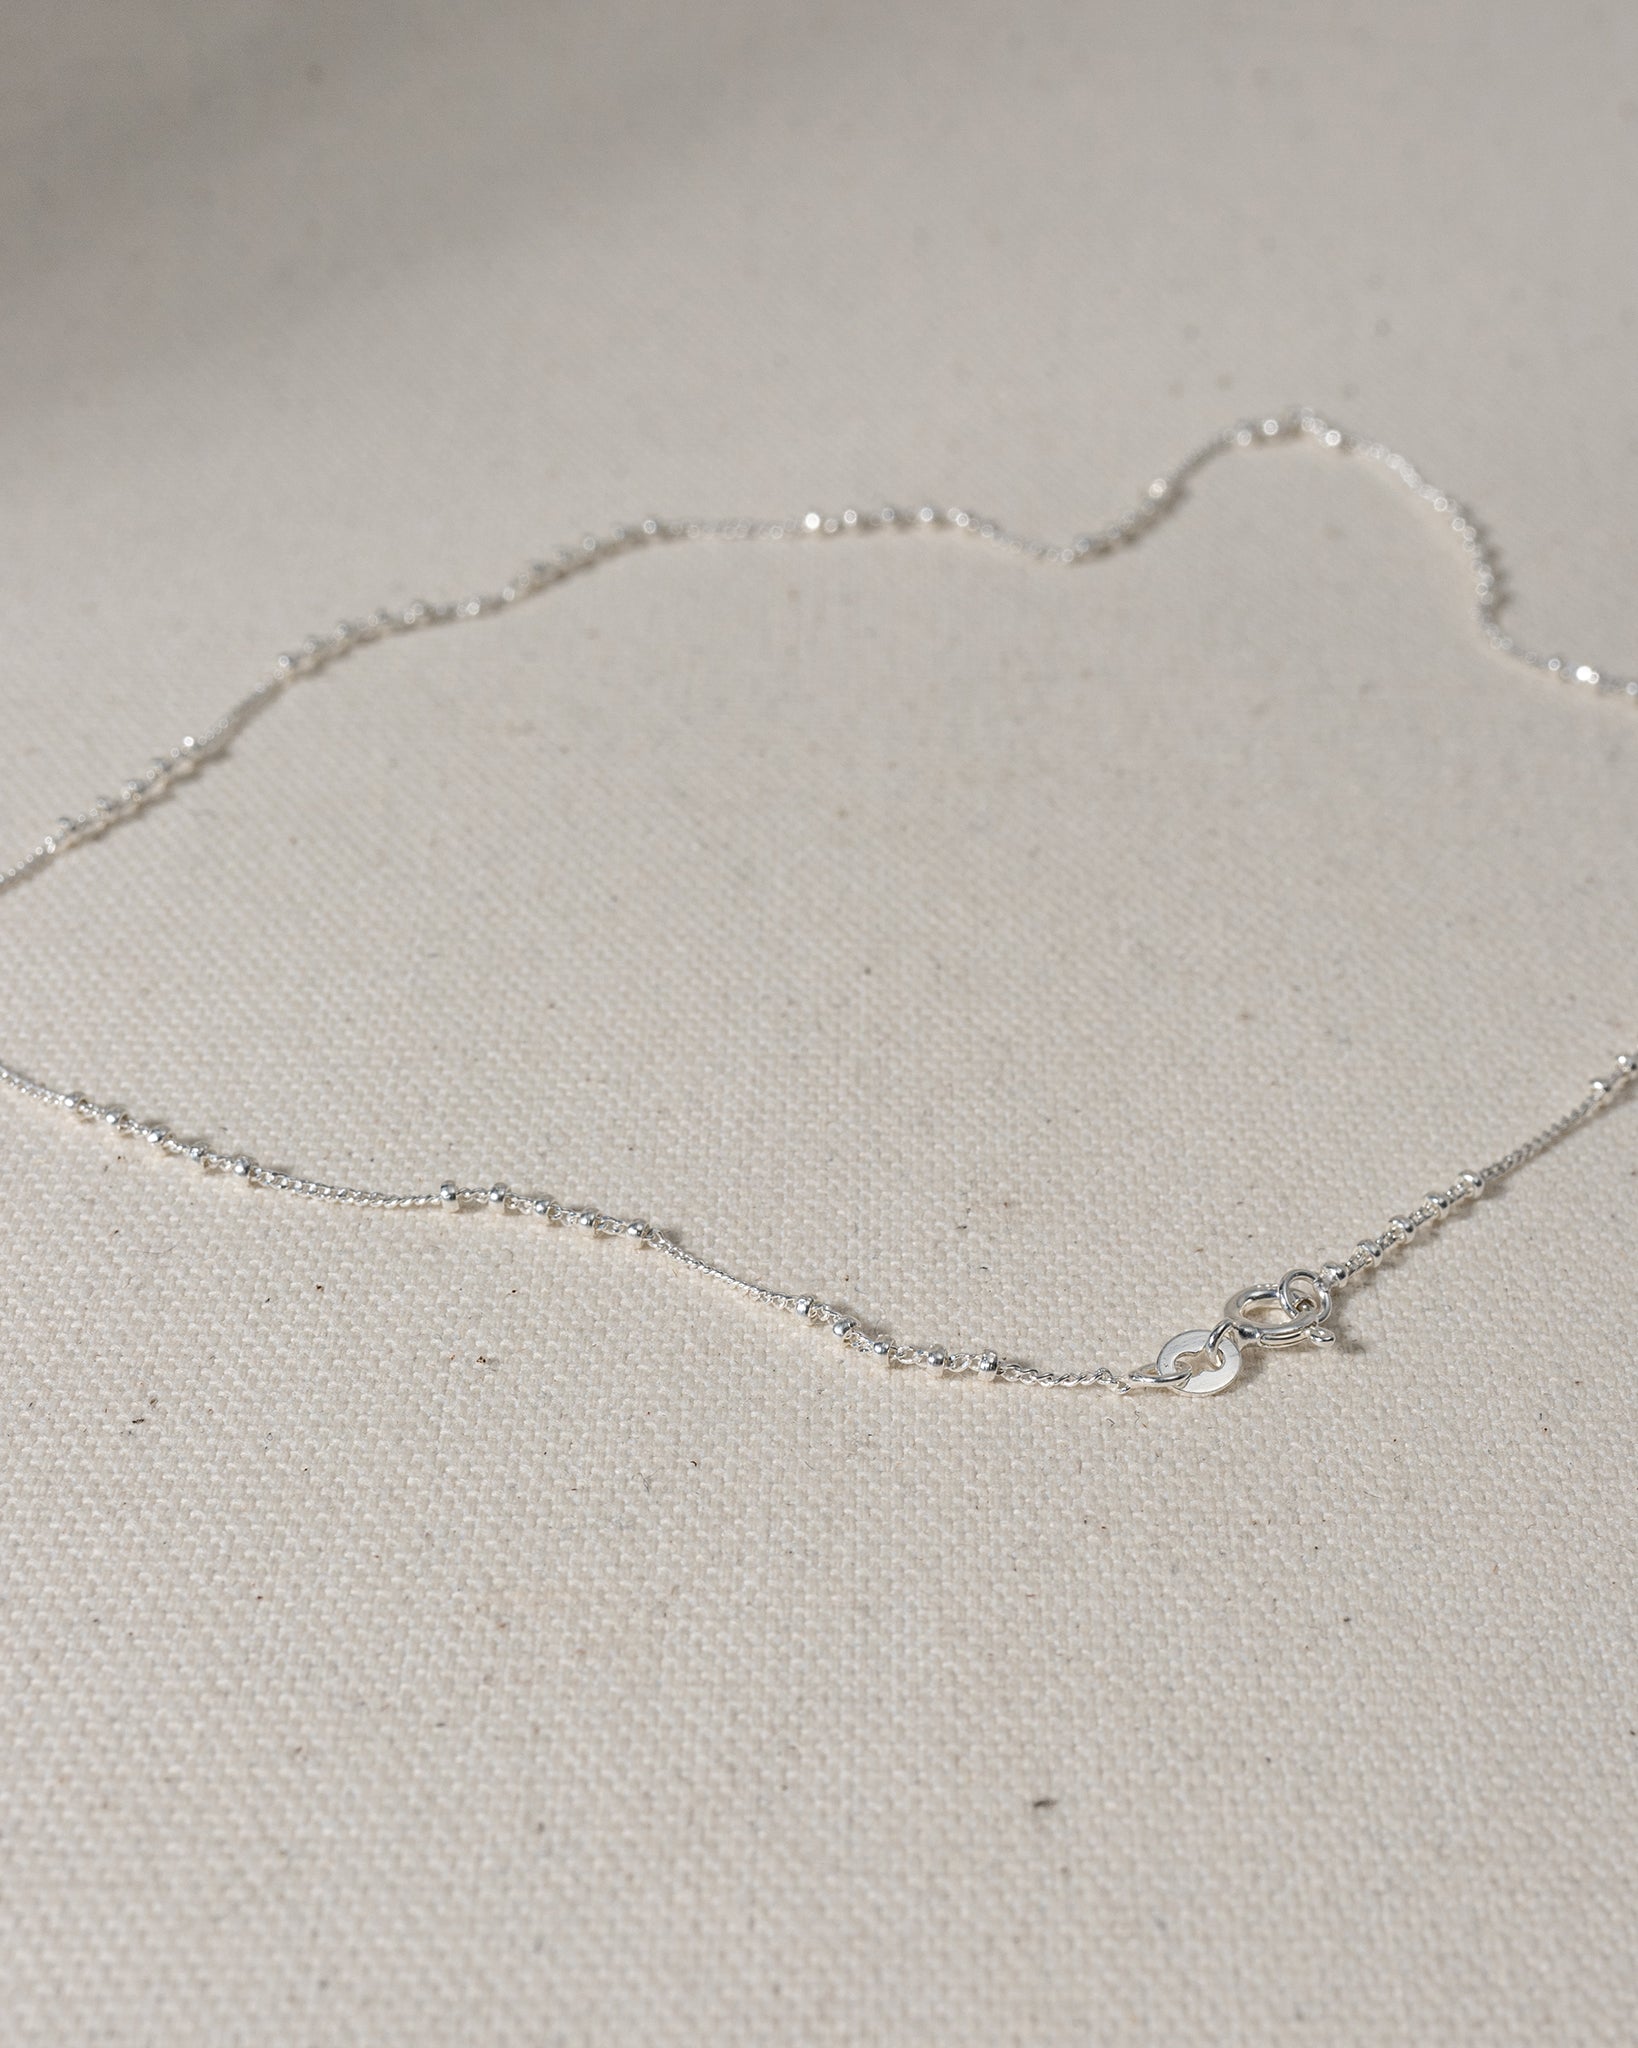 Silver chain with segments of 5 silver beads laying on canvas